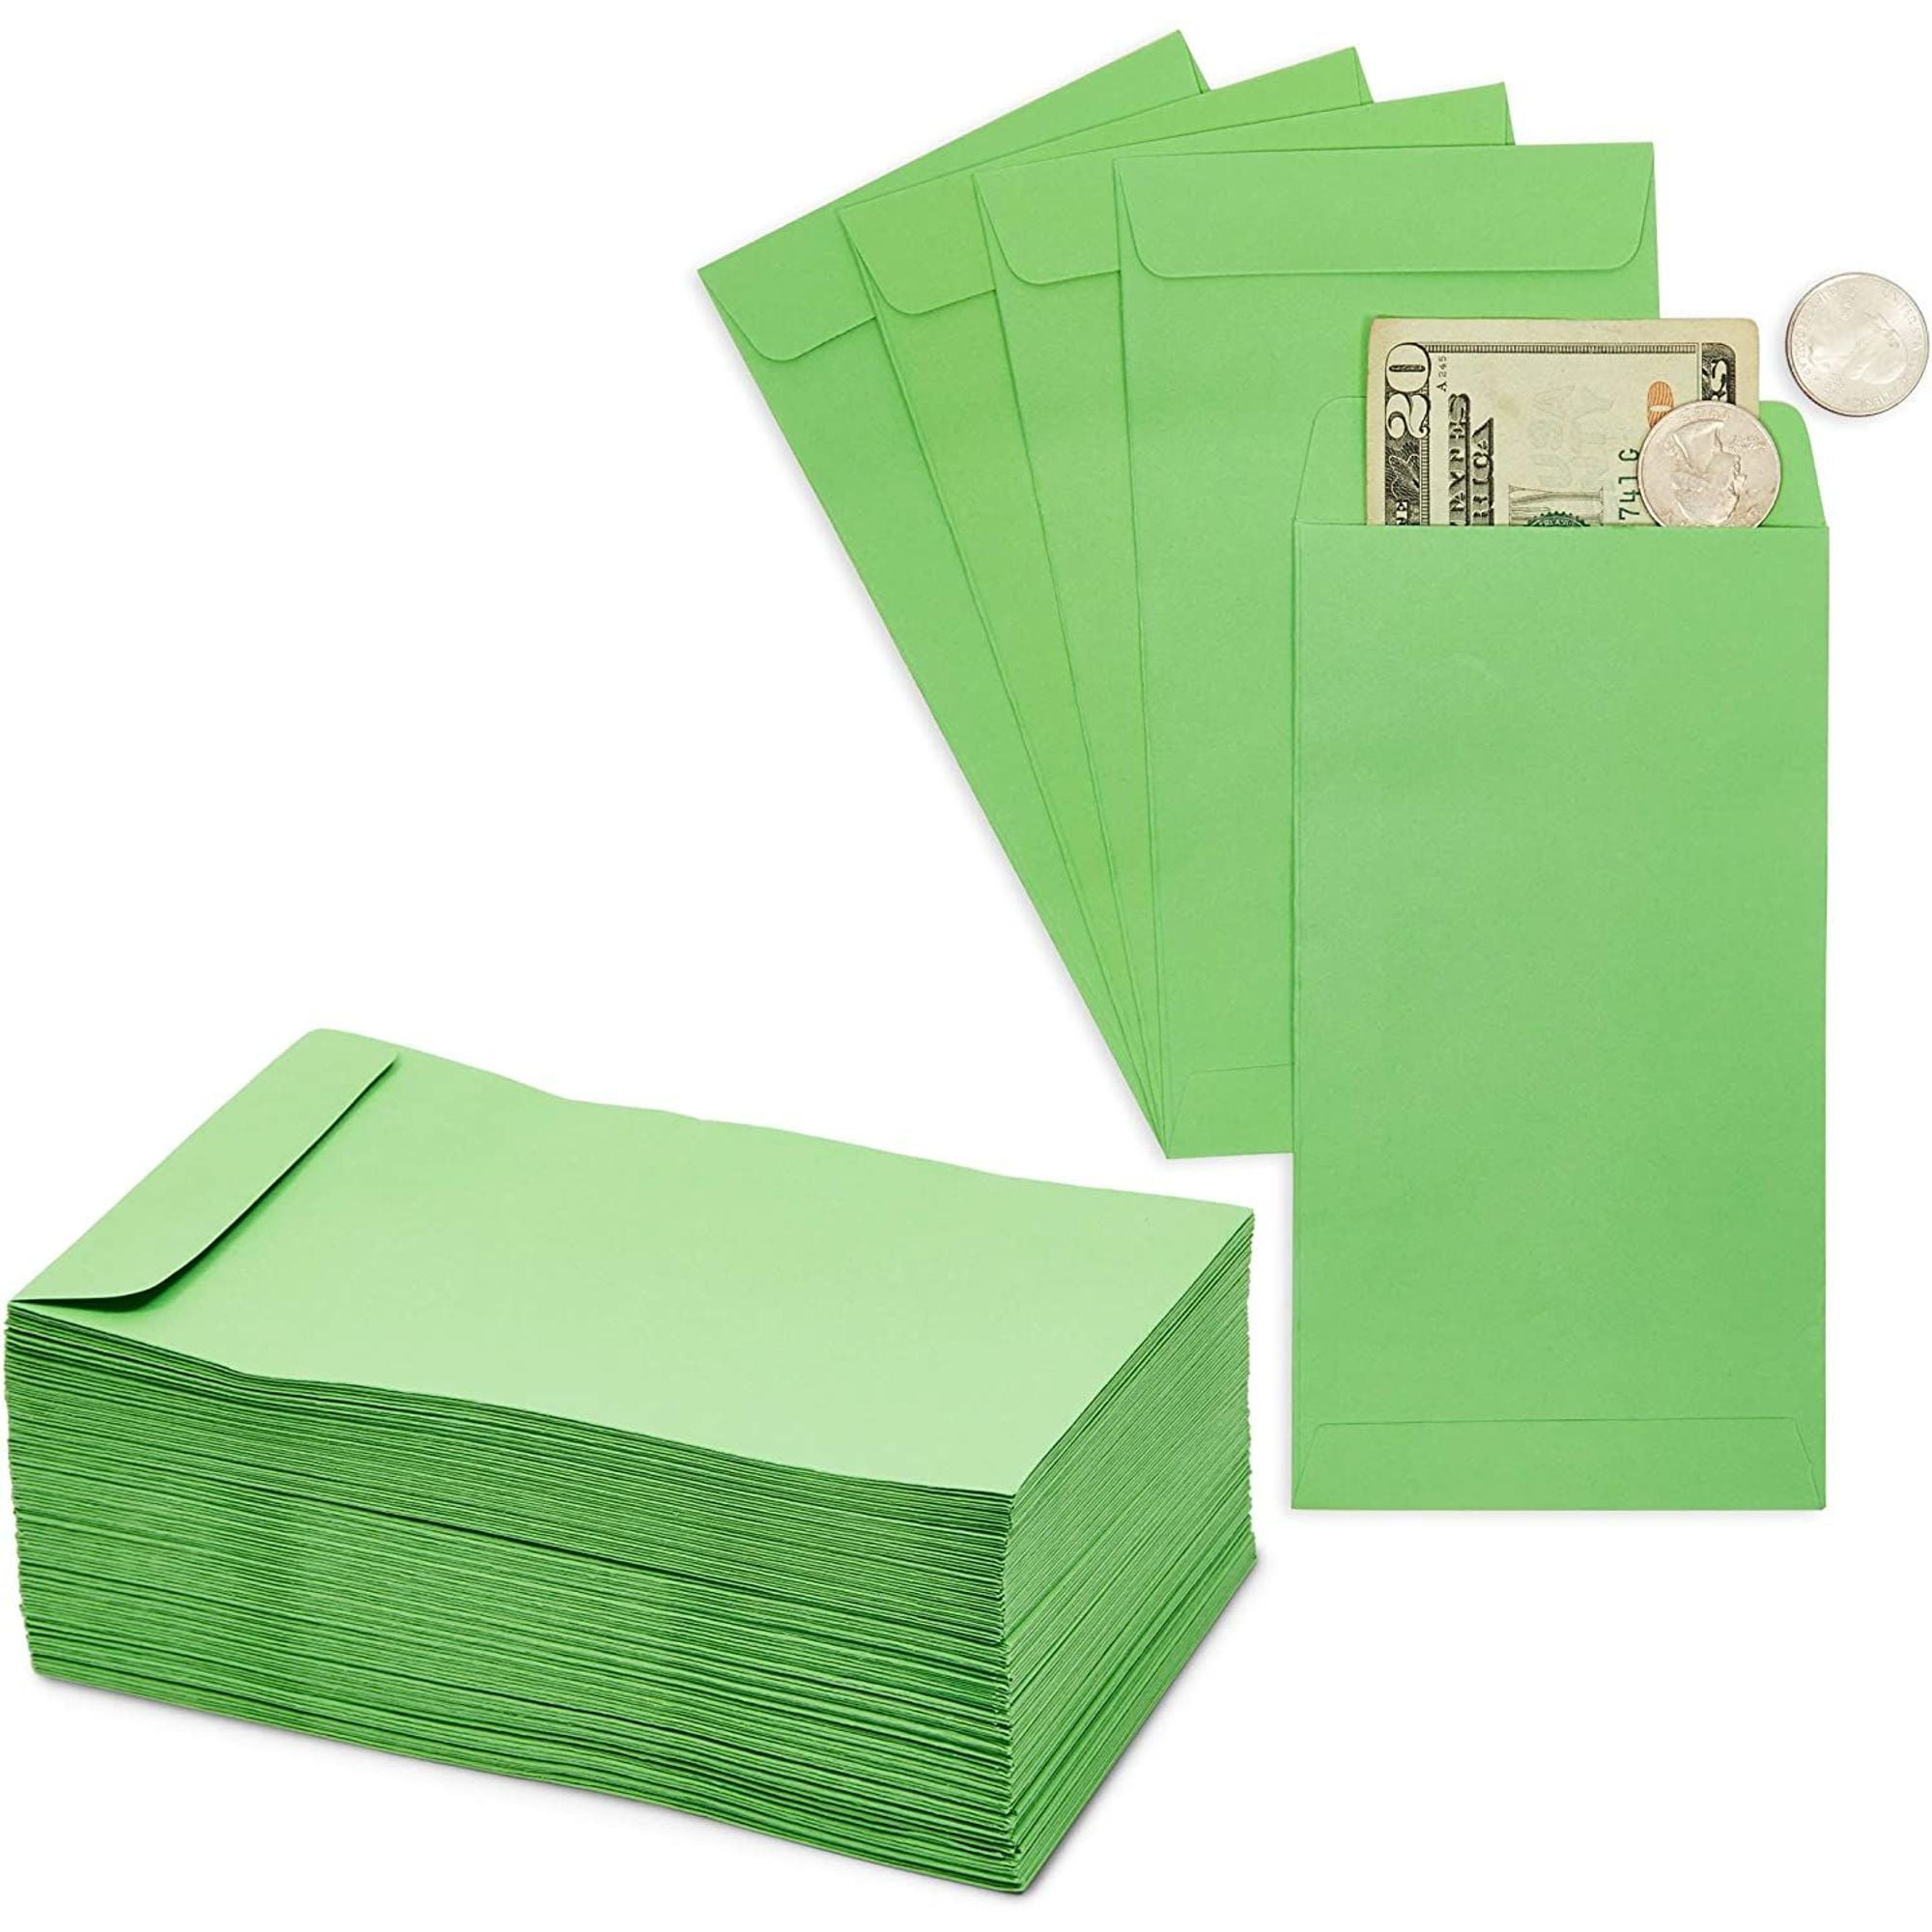 100 Pack Kraft Currency Envelopes For Cash Gift Cards Money Coins Green 3 5 X 6 5 Inches 